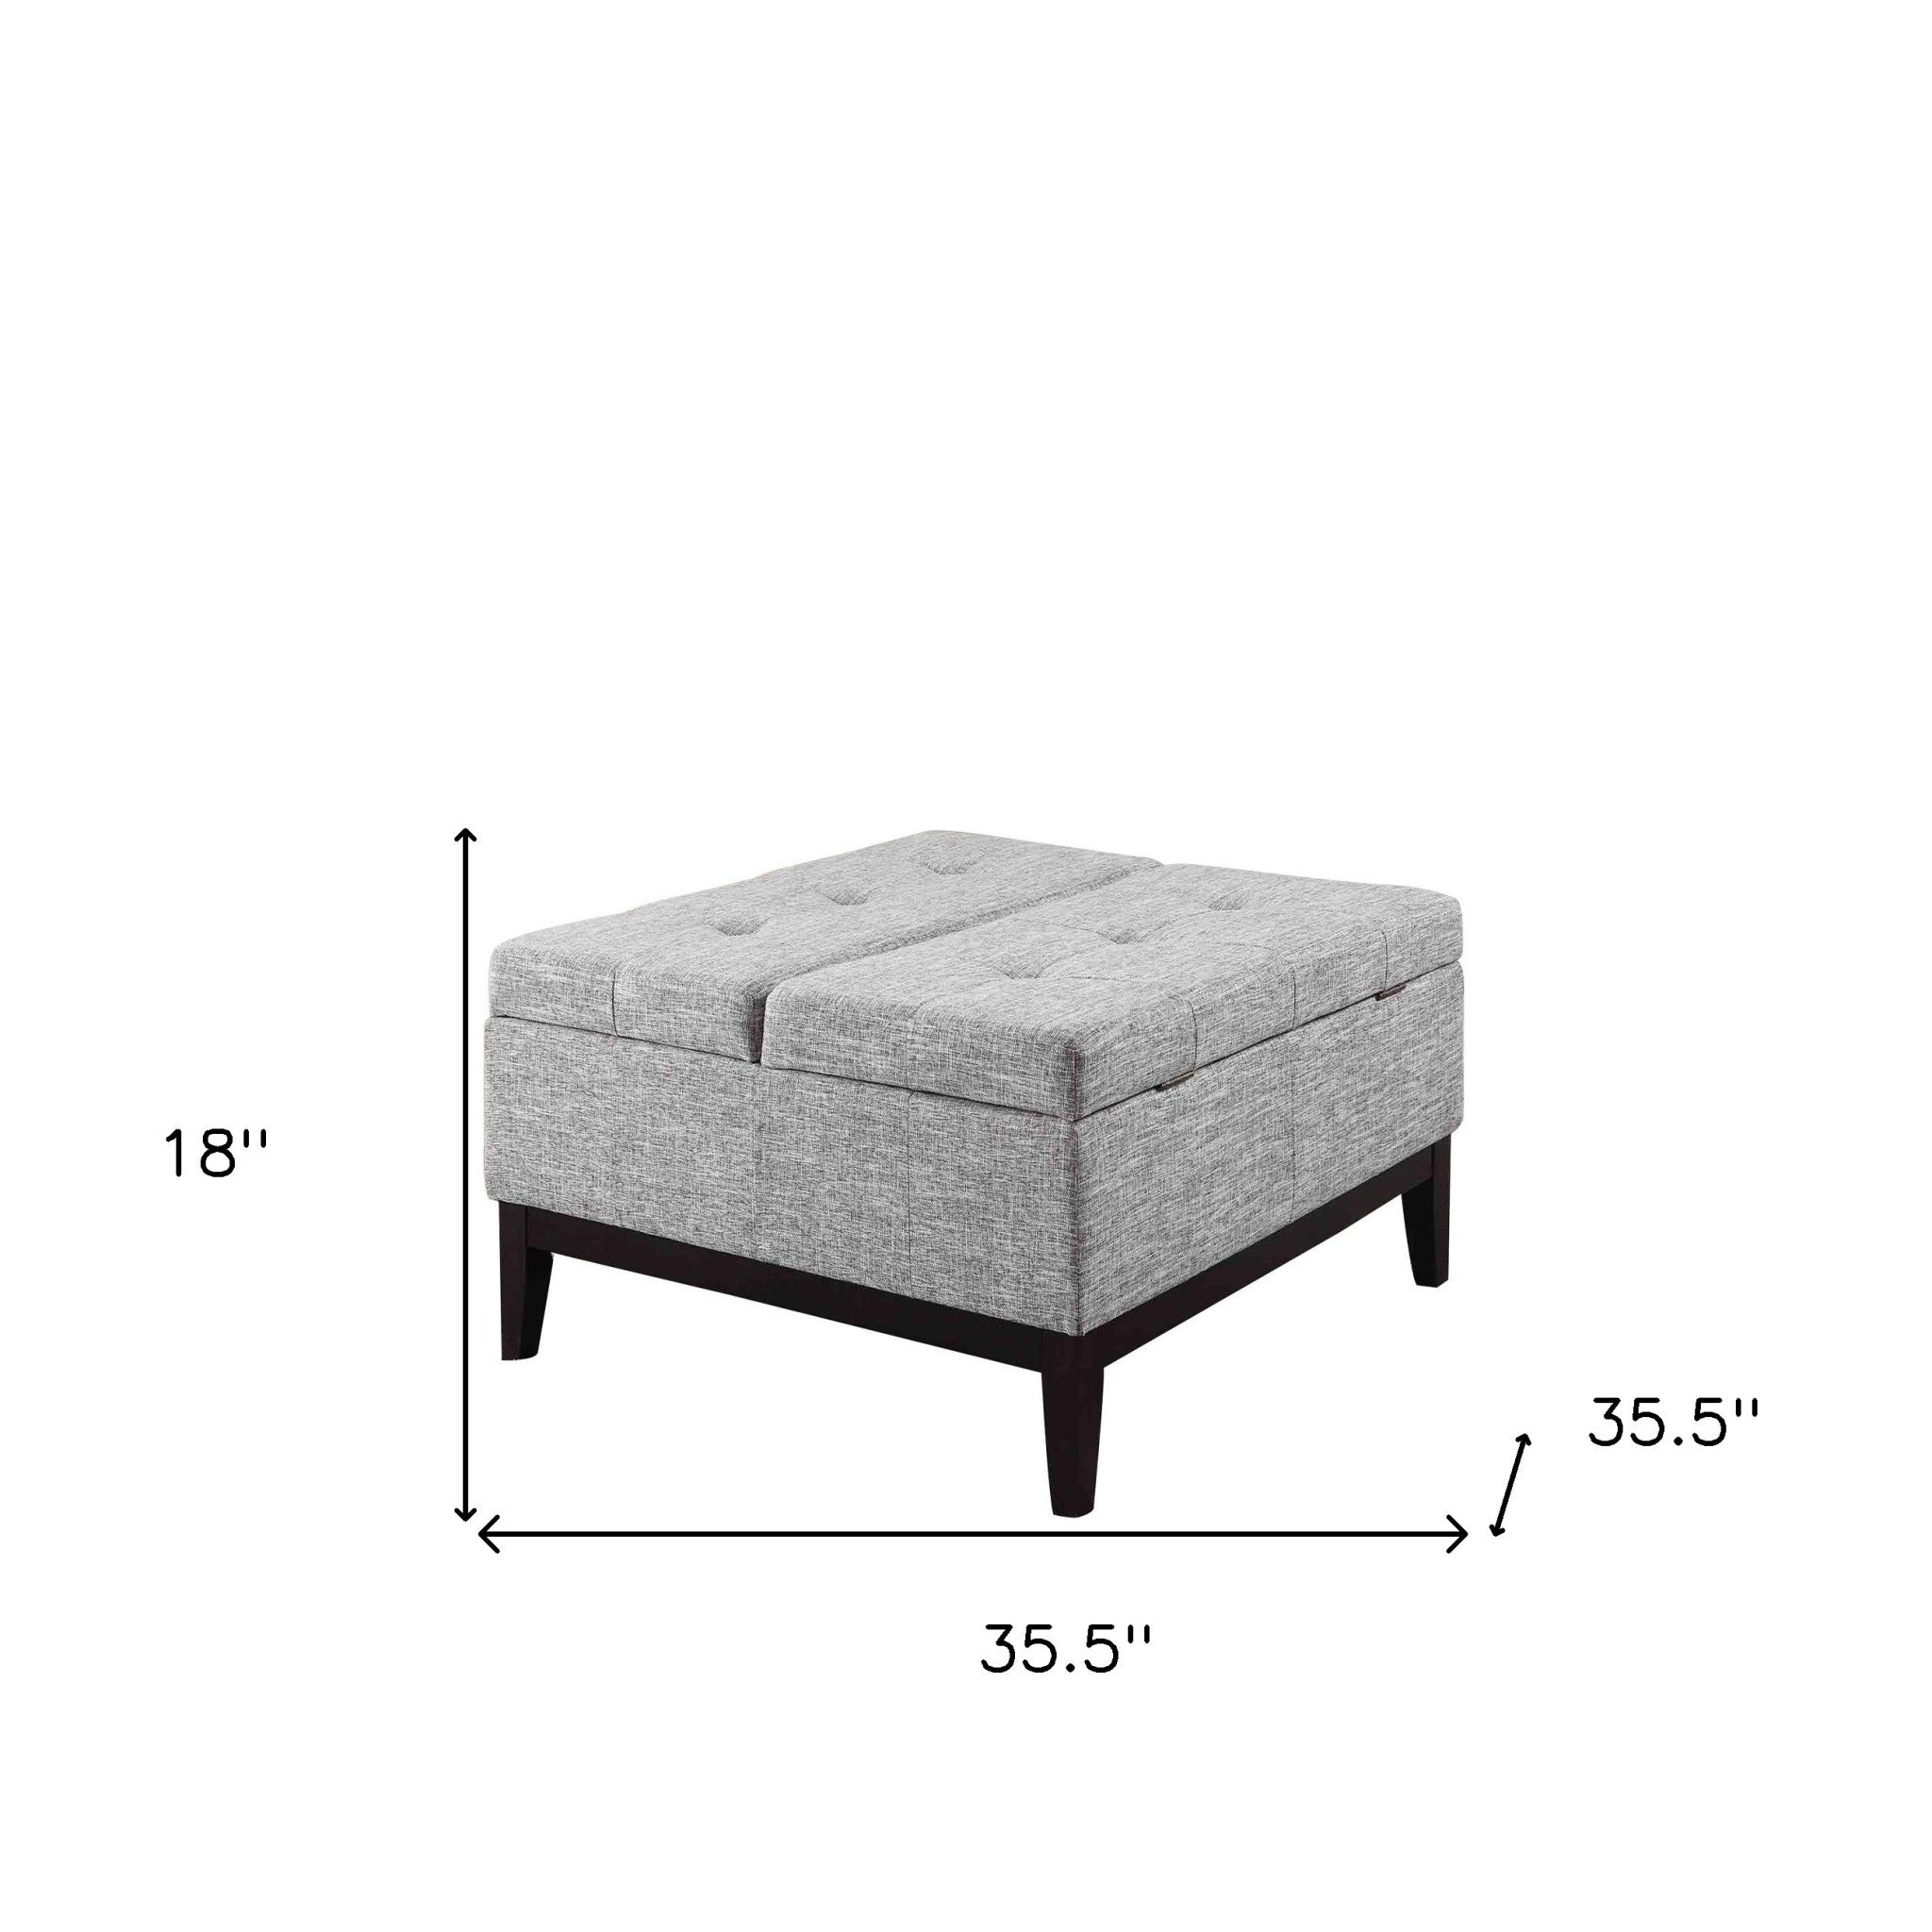 36" Light Gray Linen And Black Tufted Storage